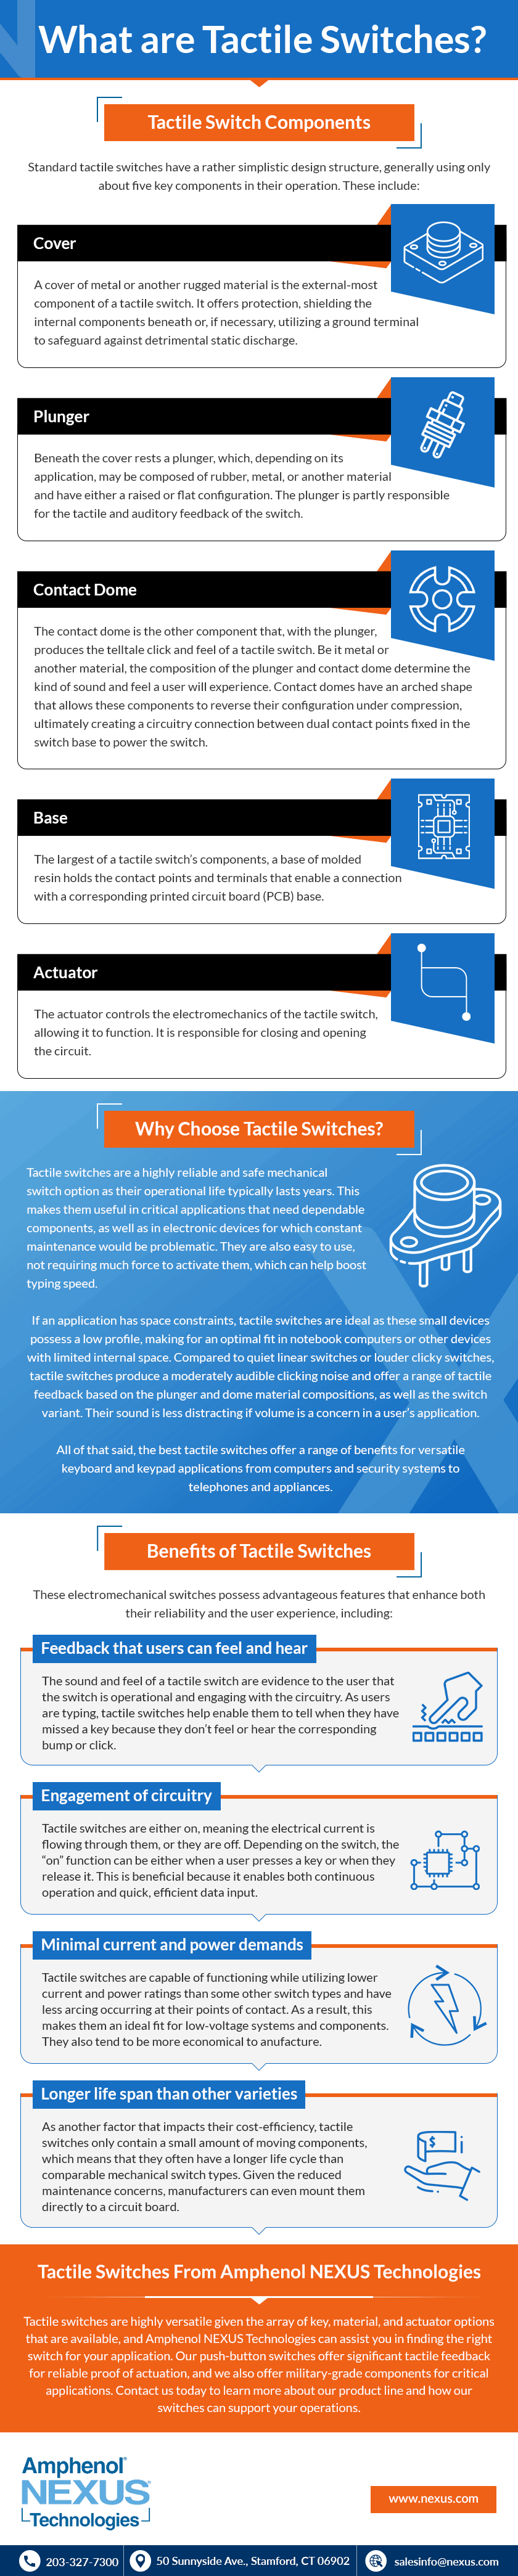 What are Tactile Switches